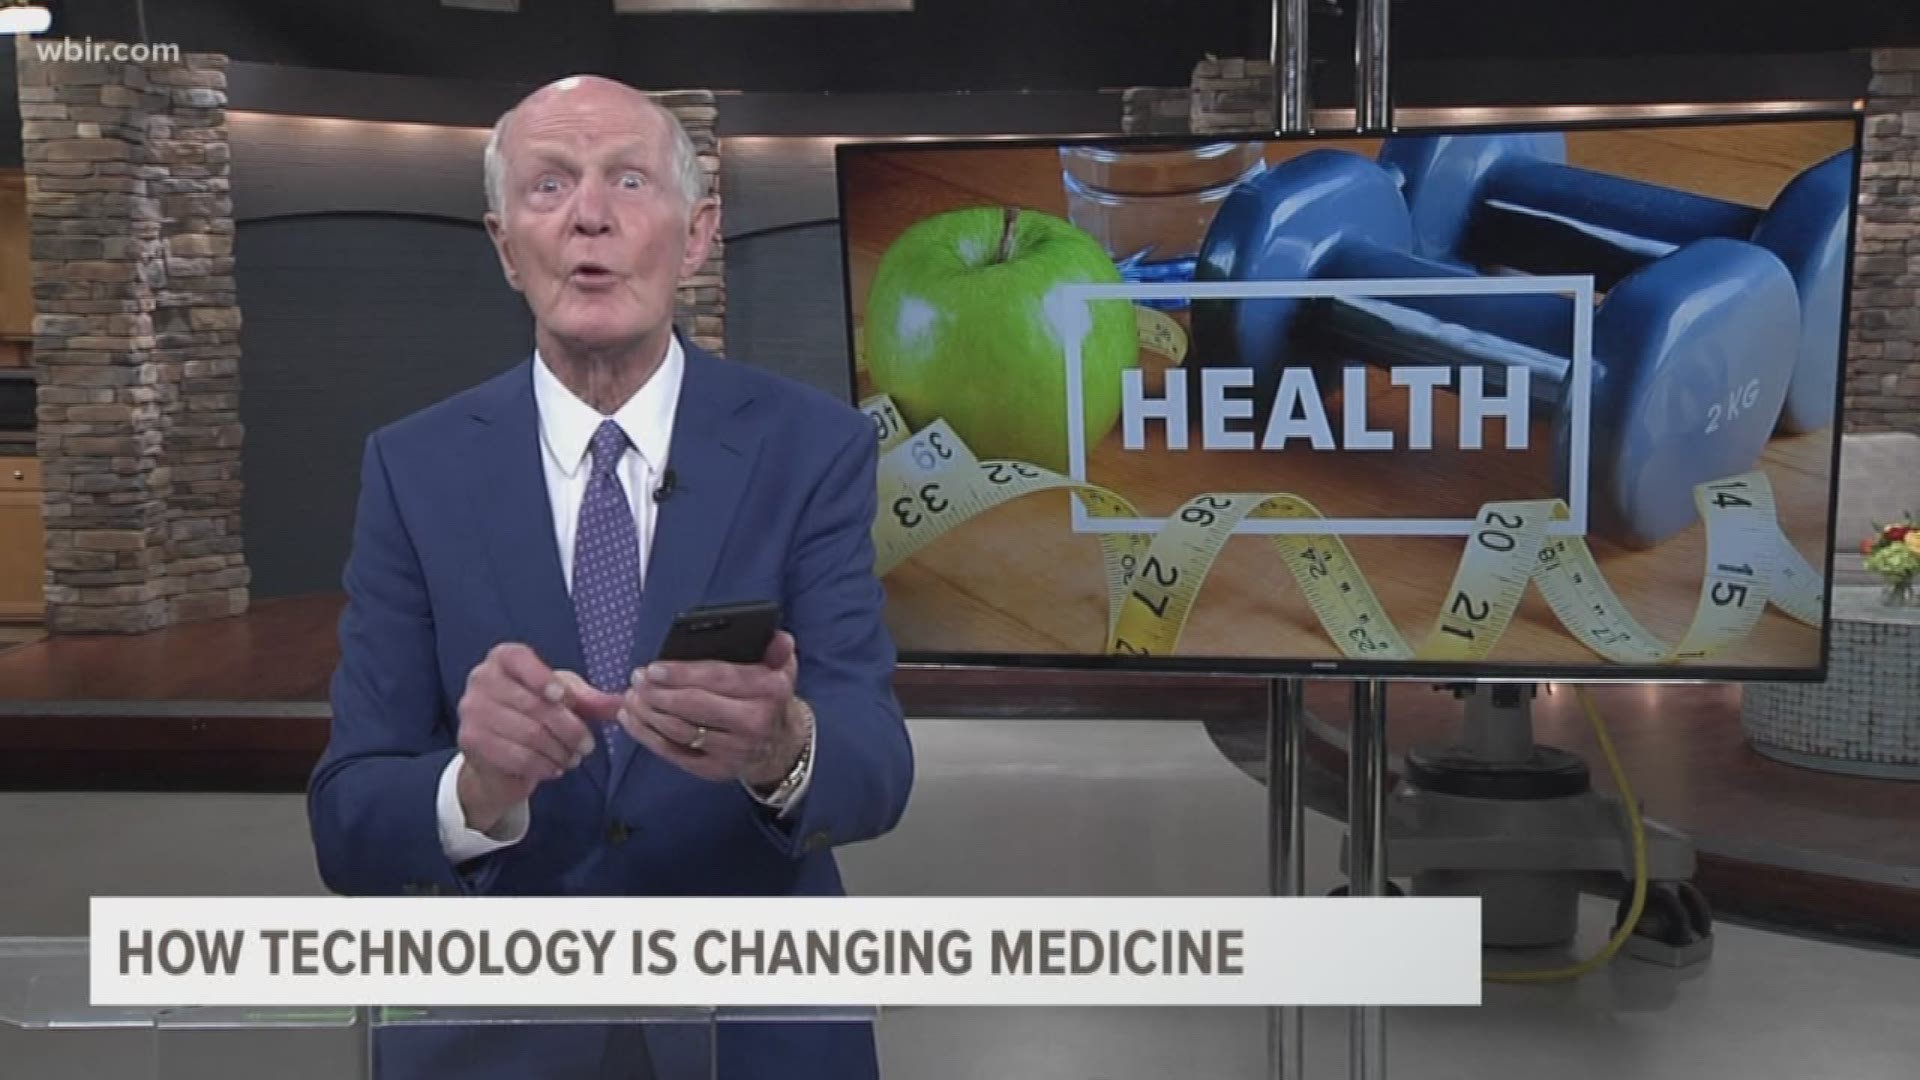 Dr. Bob explains how technology such as the cell phone is changing how doctors treat patients.